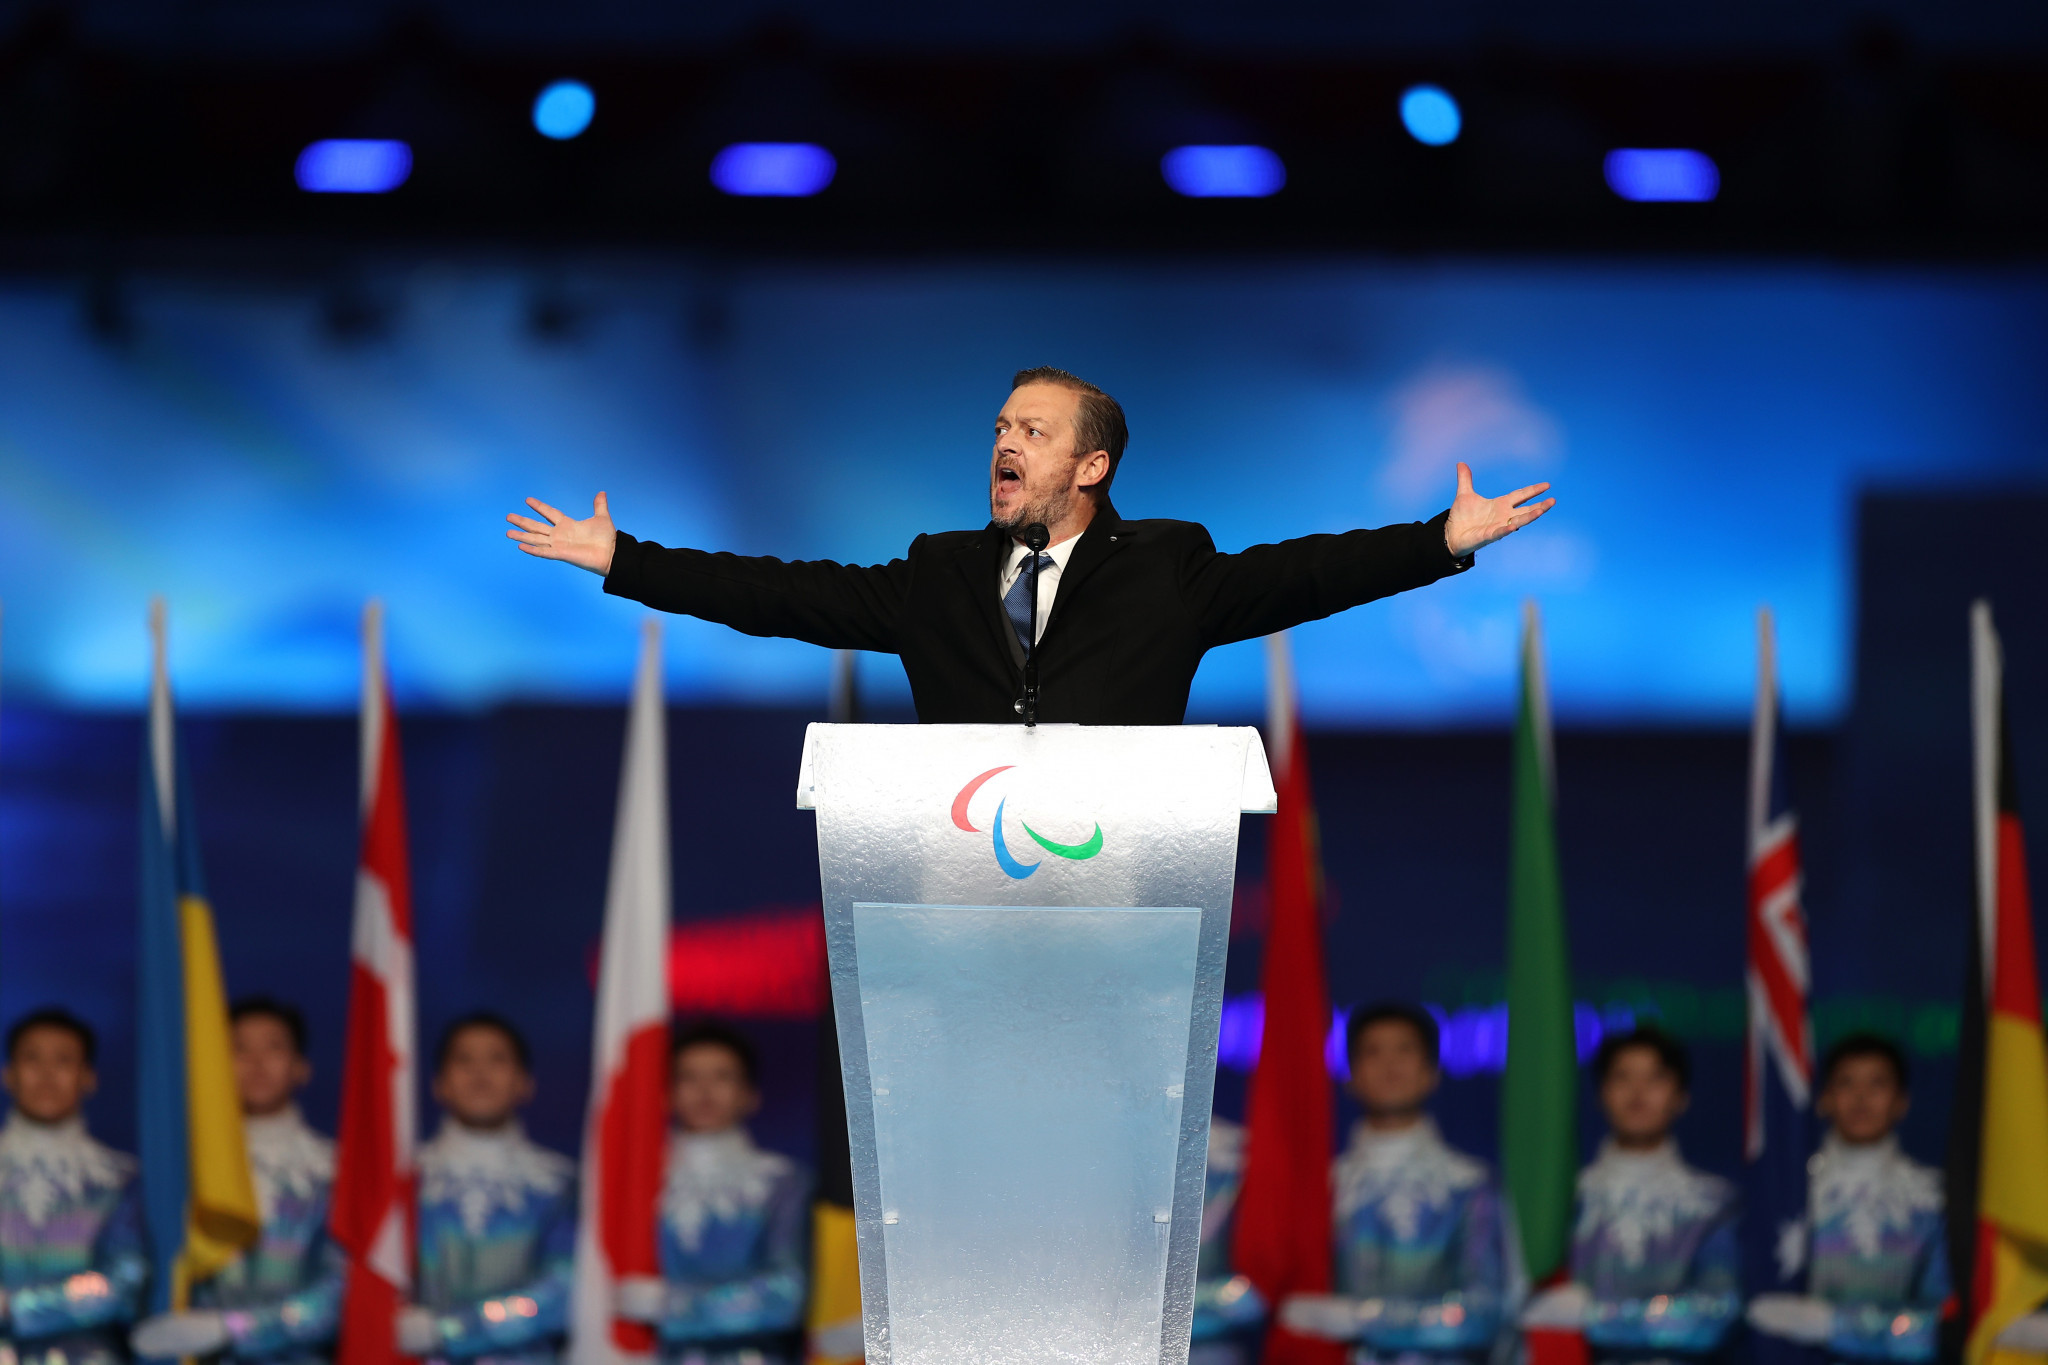 IPC President Andrew Parsons gave another rousing speech at the Closing Ceremony ©Getty Images